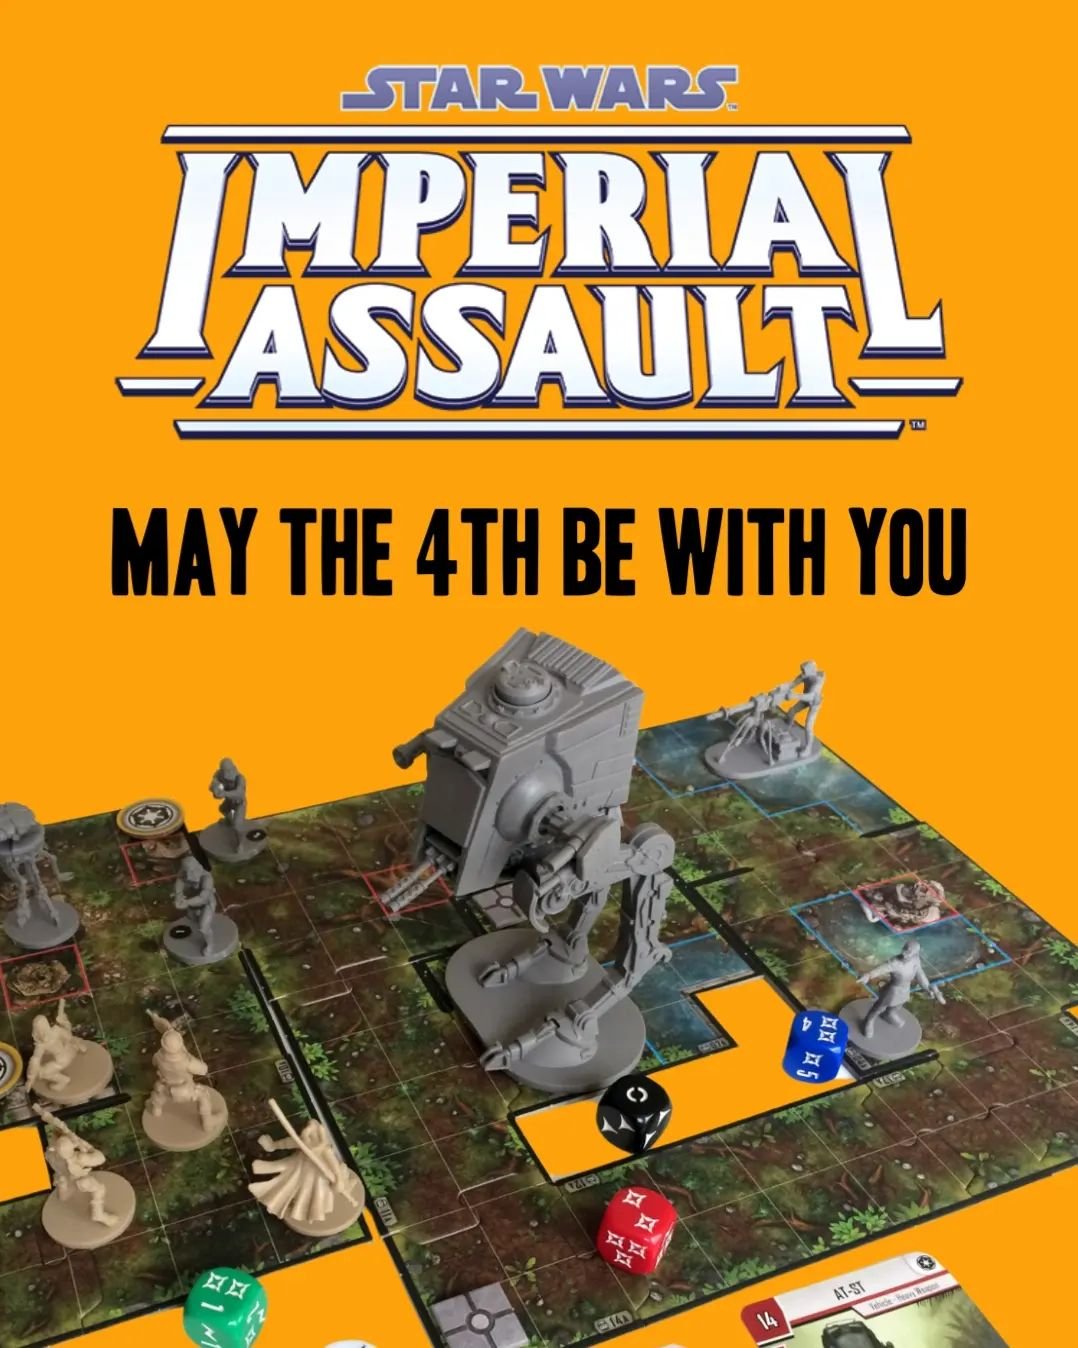 Saturday May the 4th, official Star Wars Day.
Shakes and Lattes Star Wars extravaganza.

One of the games we will be hosting through the day.

Star Wars Imperial Assault: 
Lead the Empire's ruthless forces or team up with friends as rebel heroes. One